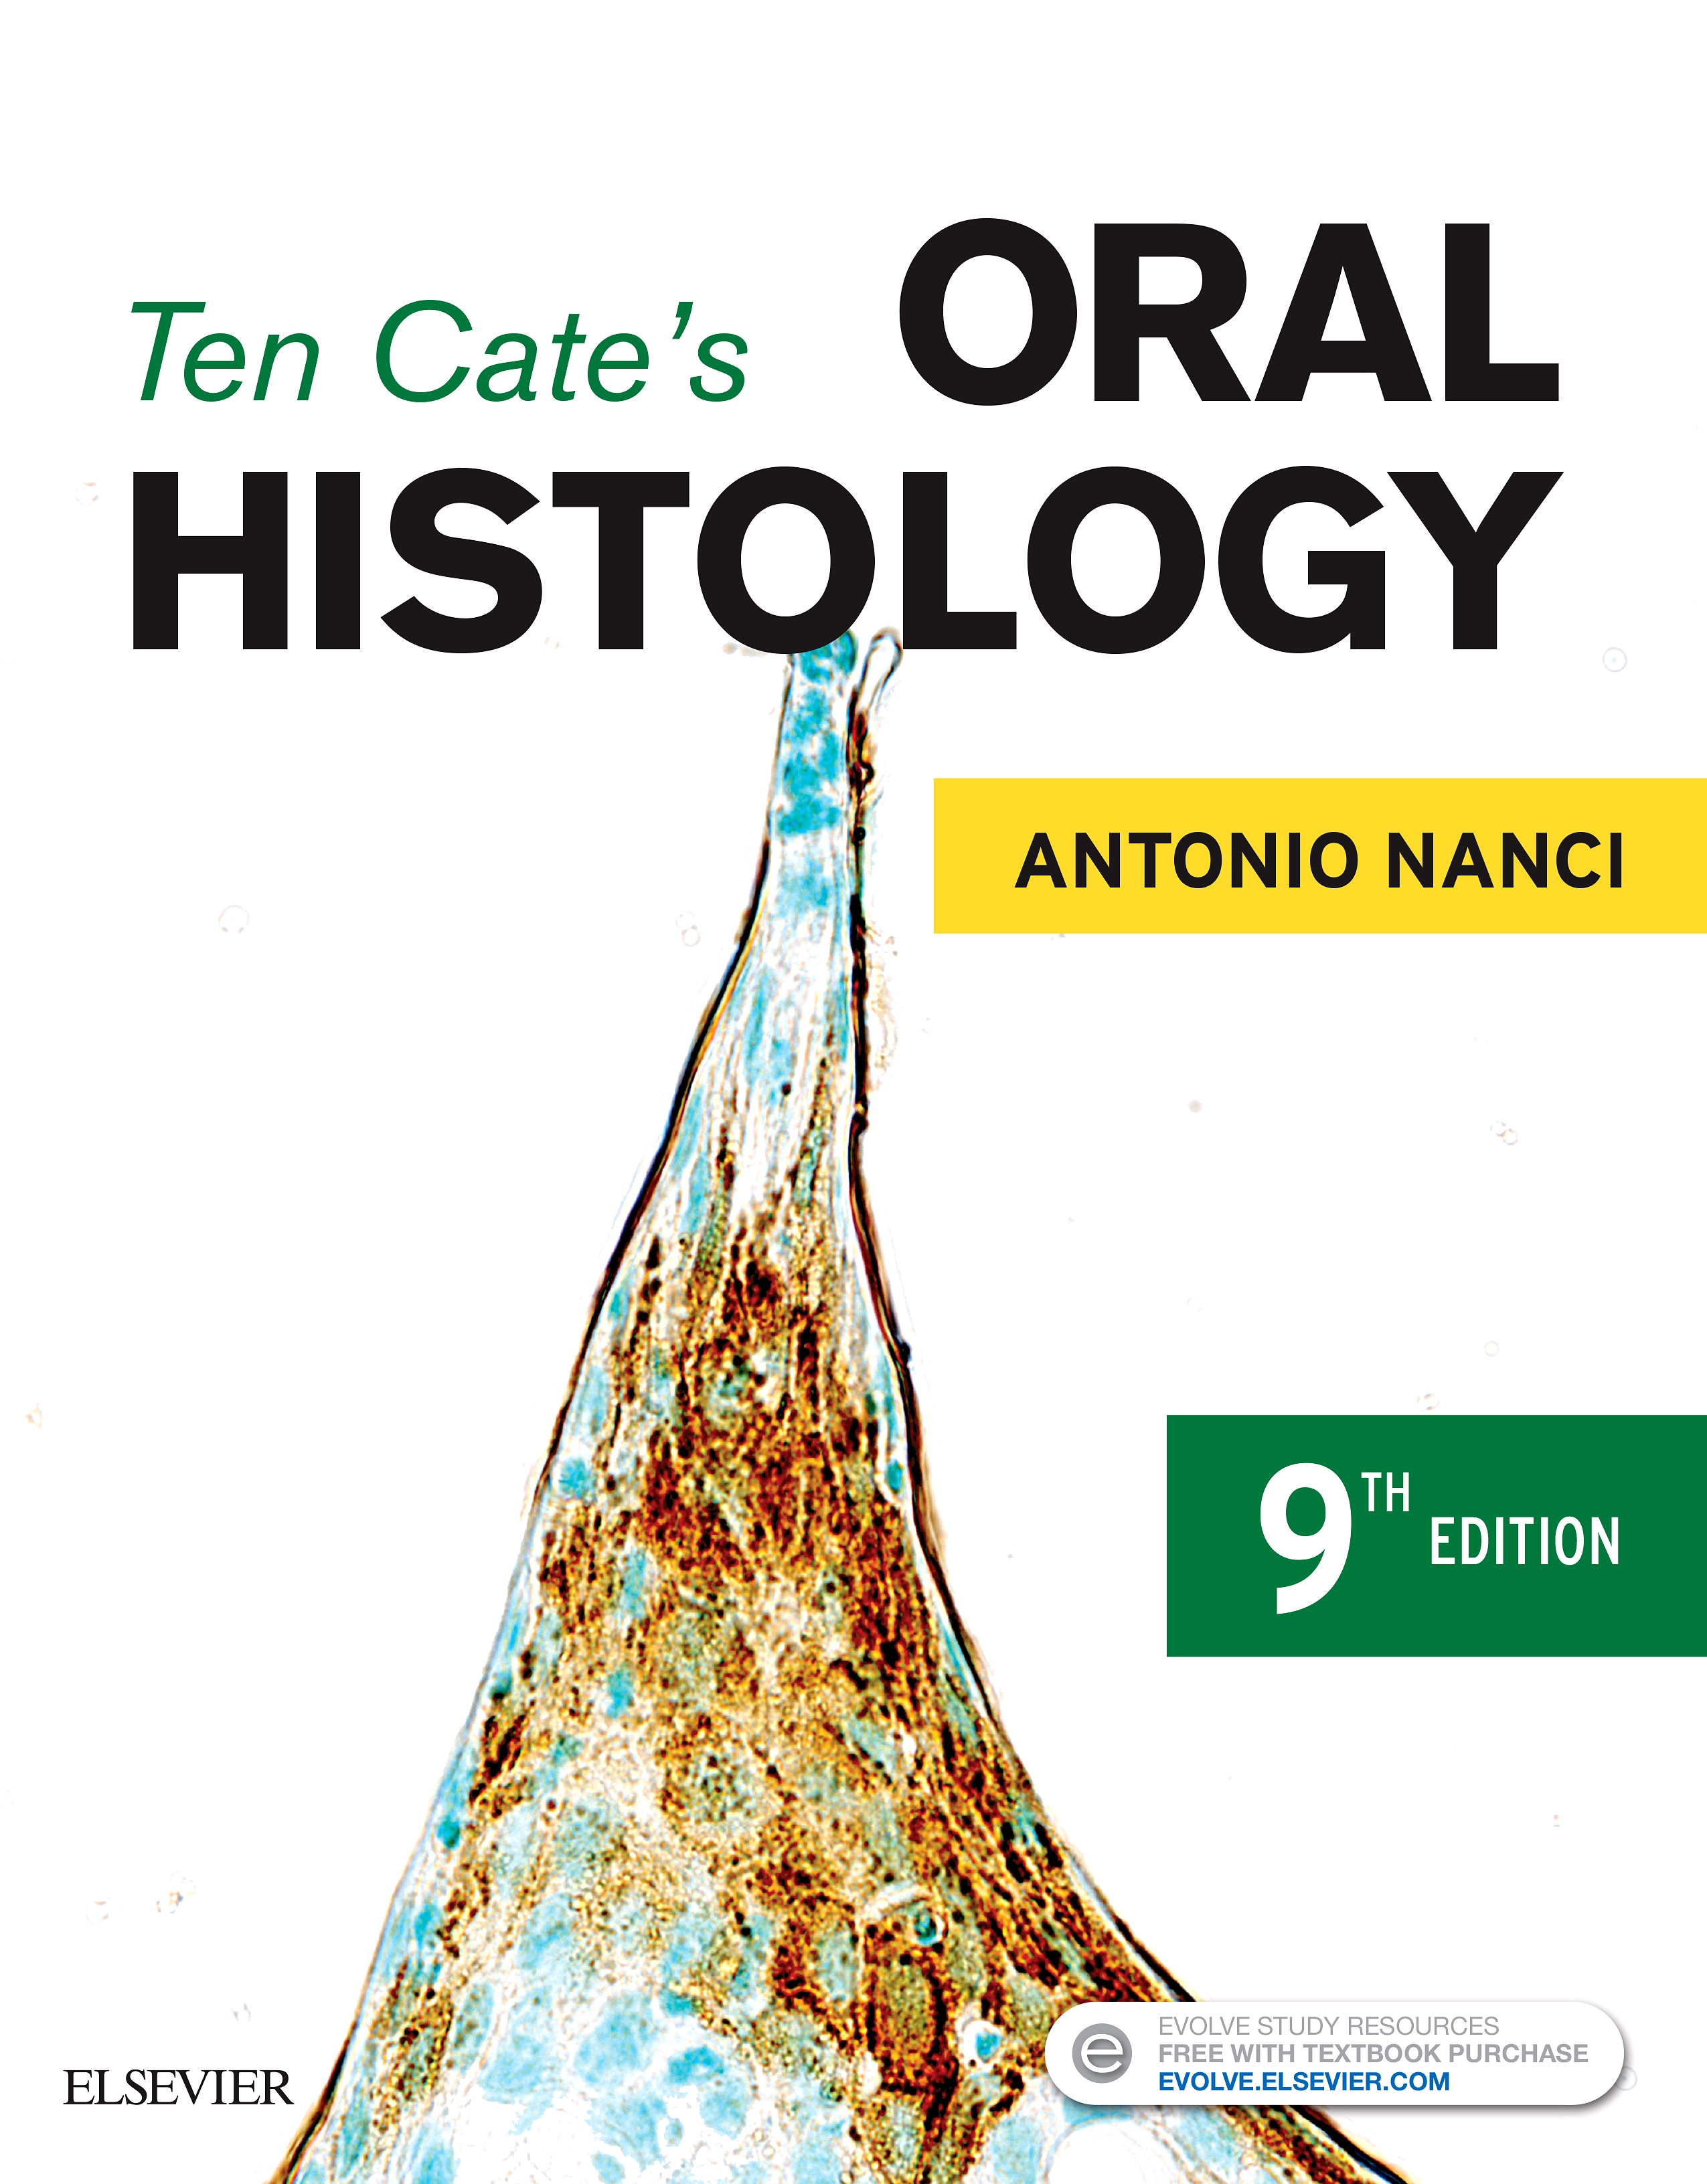 Evolve Resources for Ten Cate's Oral Histology, 9th Edition